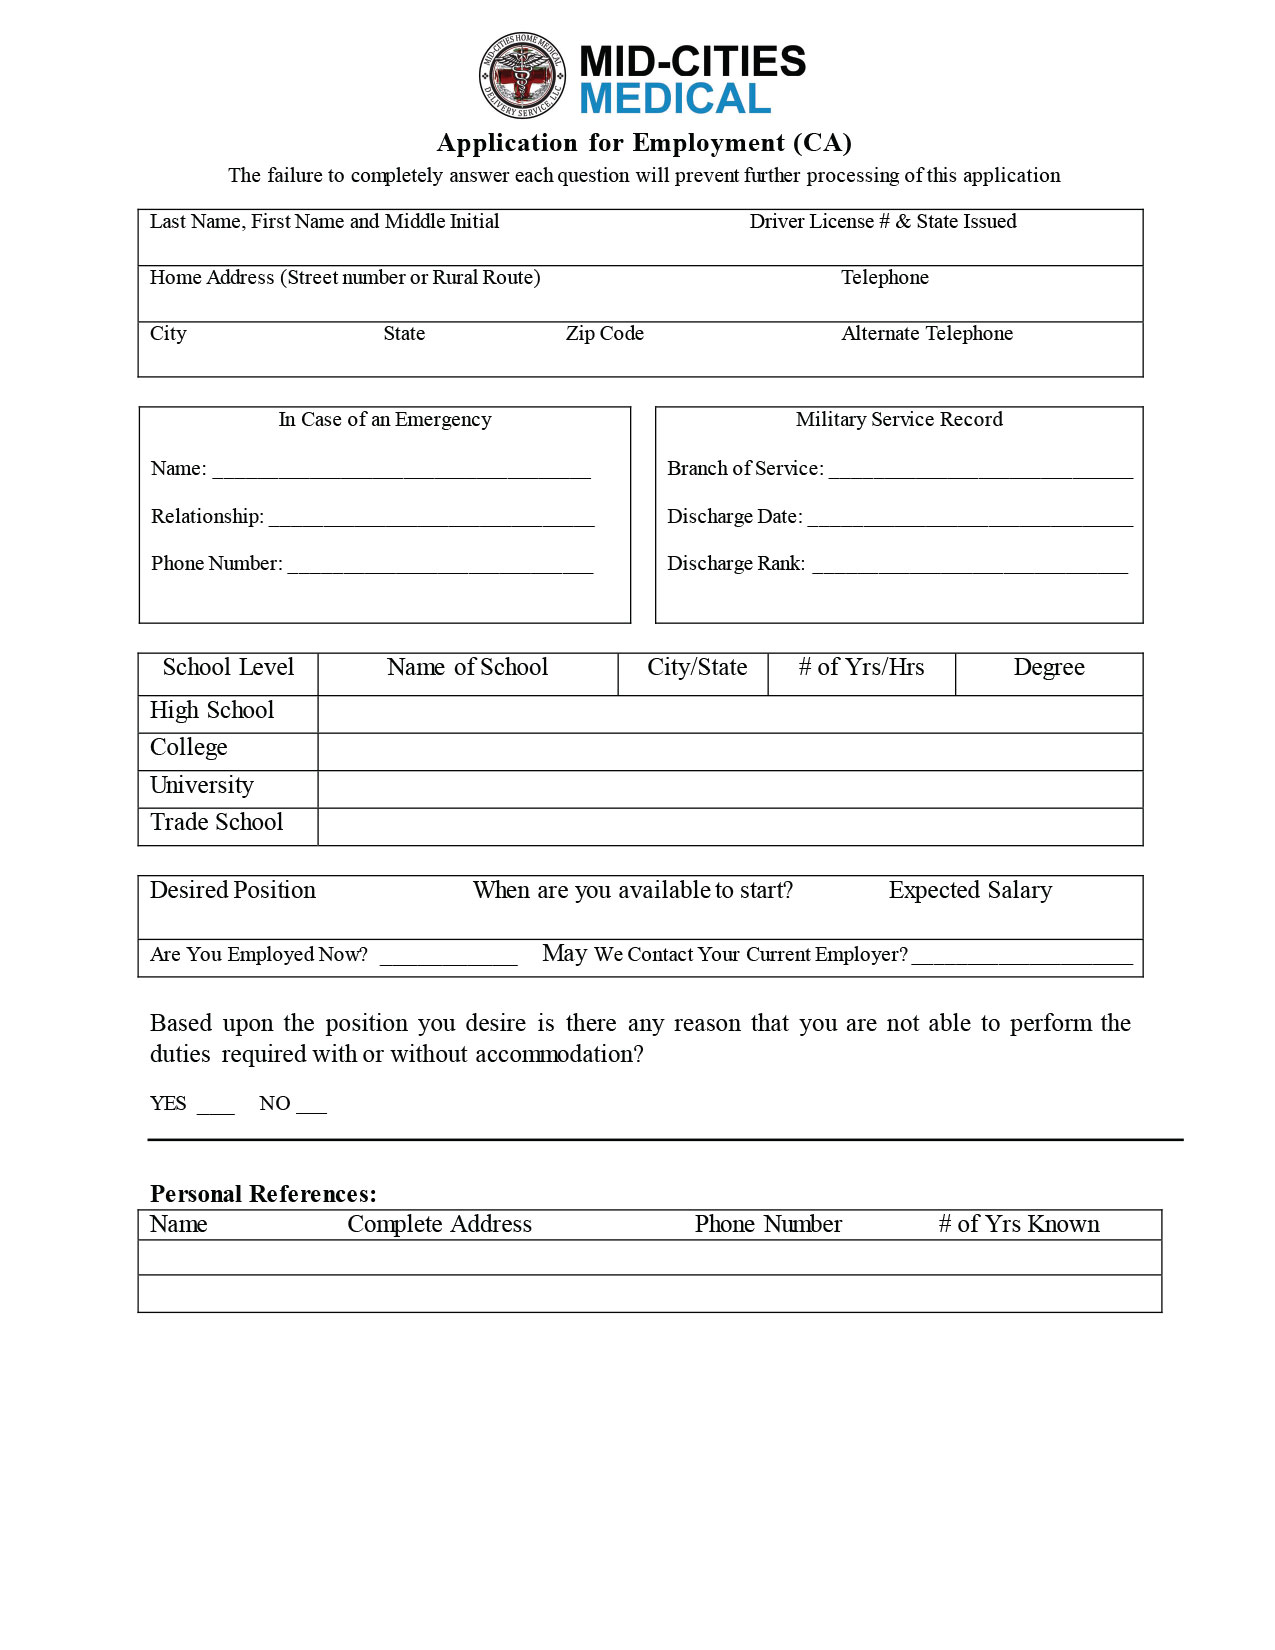 application for employment CA